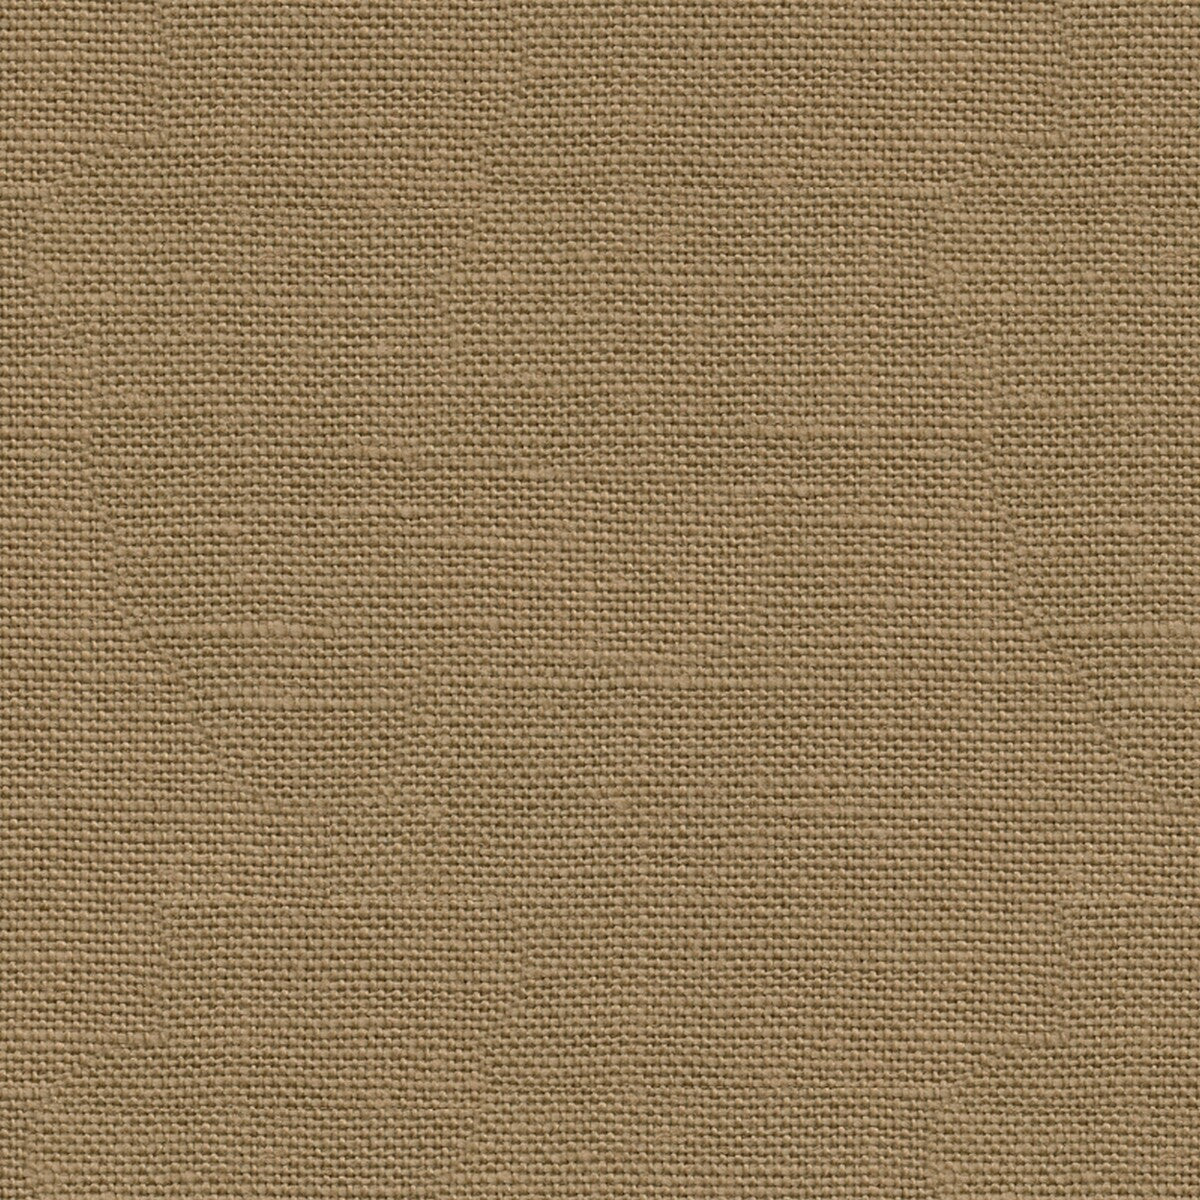 Weekend Linen fabric in camel color - pattern FD698.L102.0 - by Mulberry in the Crayford collection